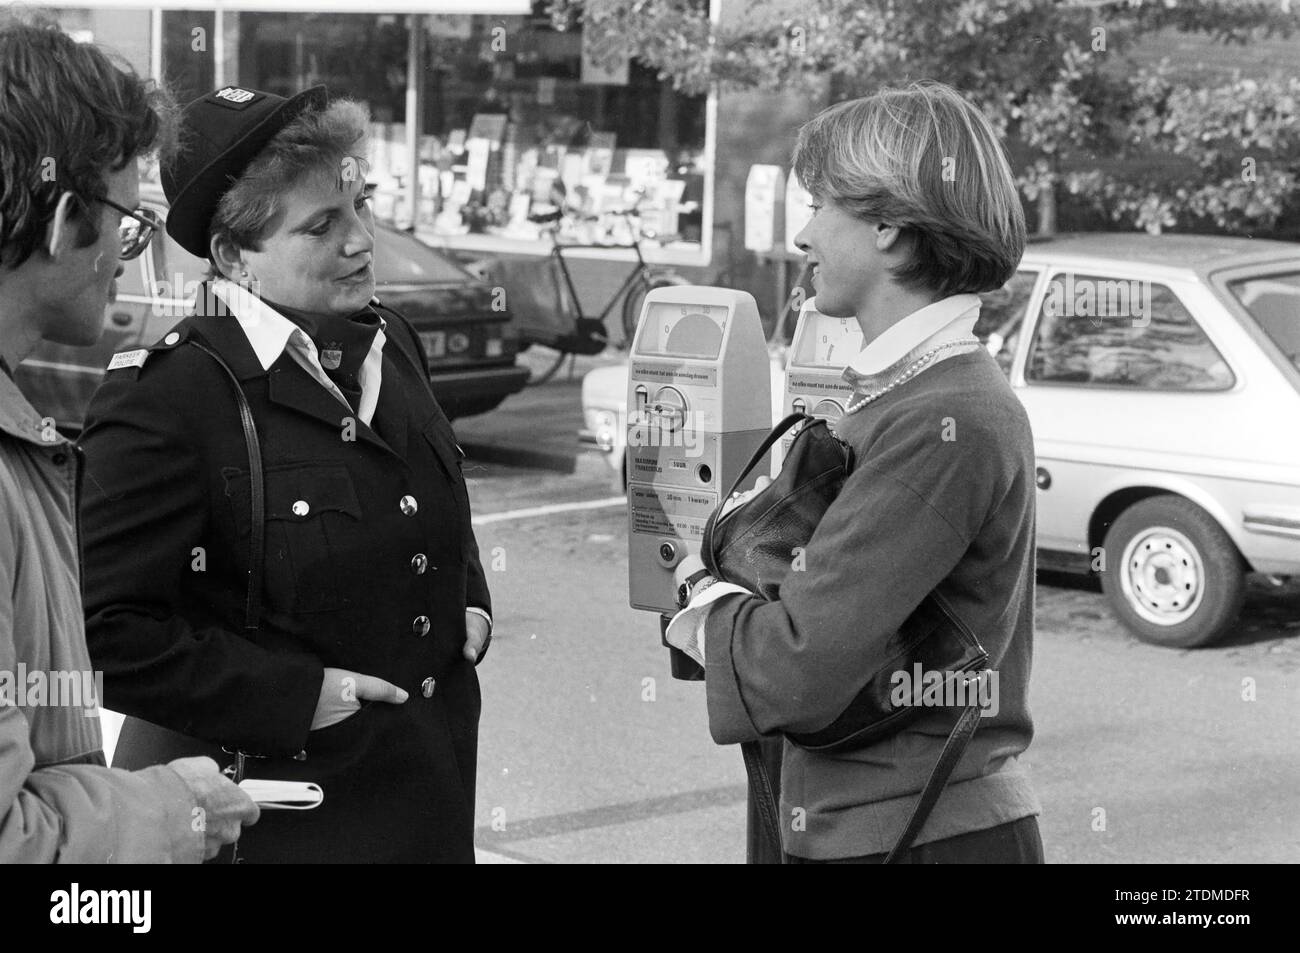 Parking police in action, Hoofddorp, Parking, parking lots, parking lots, Hoofddorp, The Netherlands, 26-10-1983, Whizgle News from the Past, Tailored for the Future. Explore historical narratives, Dutch The Netherlands agency image with a modern perspective, bridging the gap between yesterday's events and tomorrow's insights. A timeless journey shaping the stories that shape our future Stock Photo